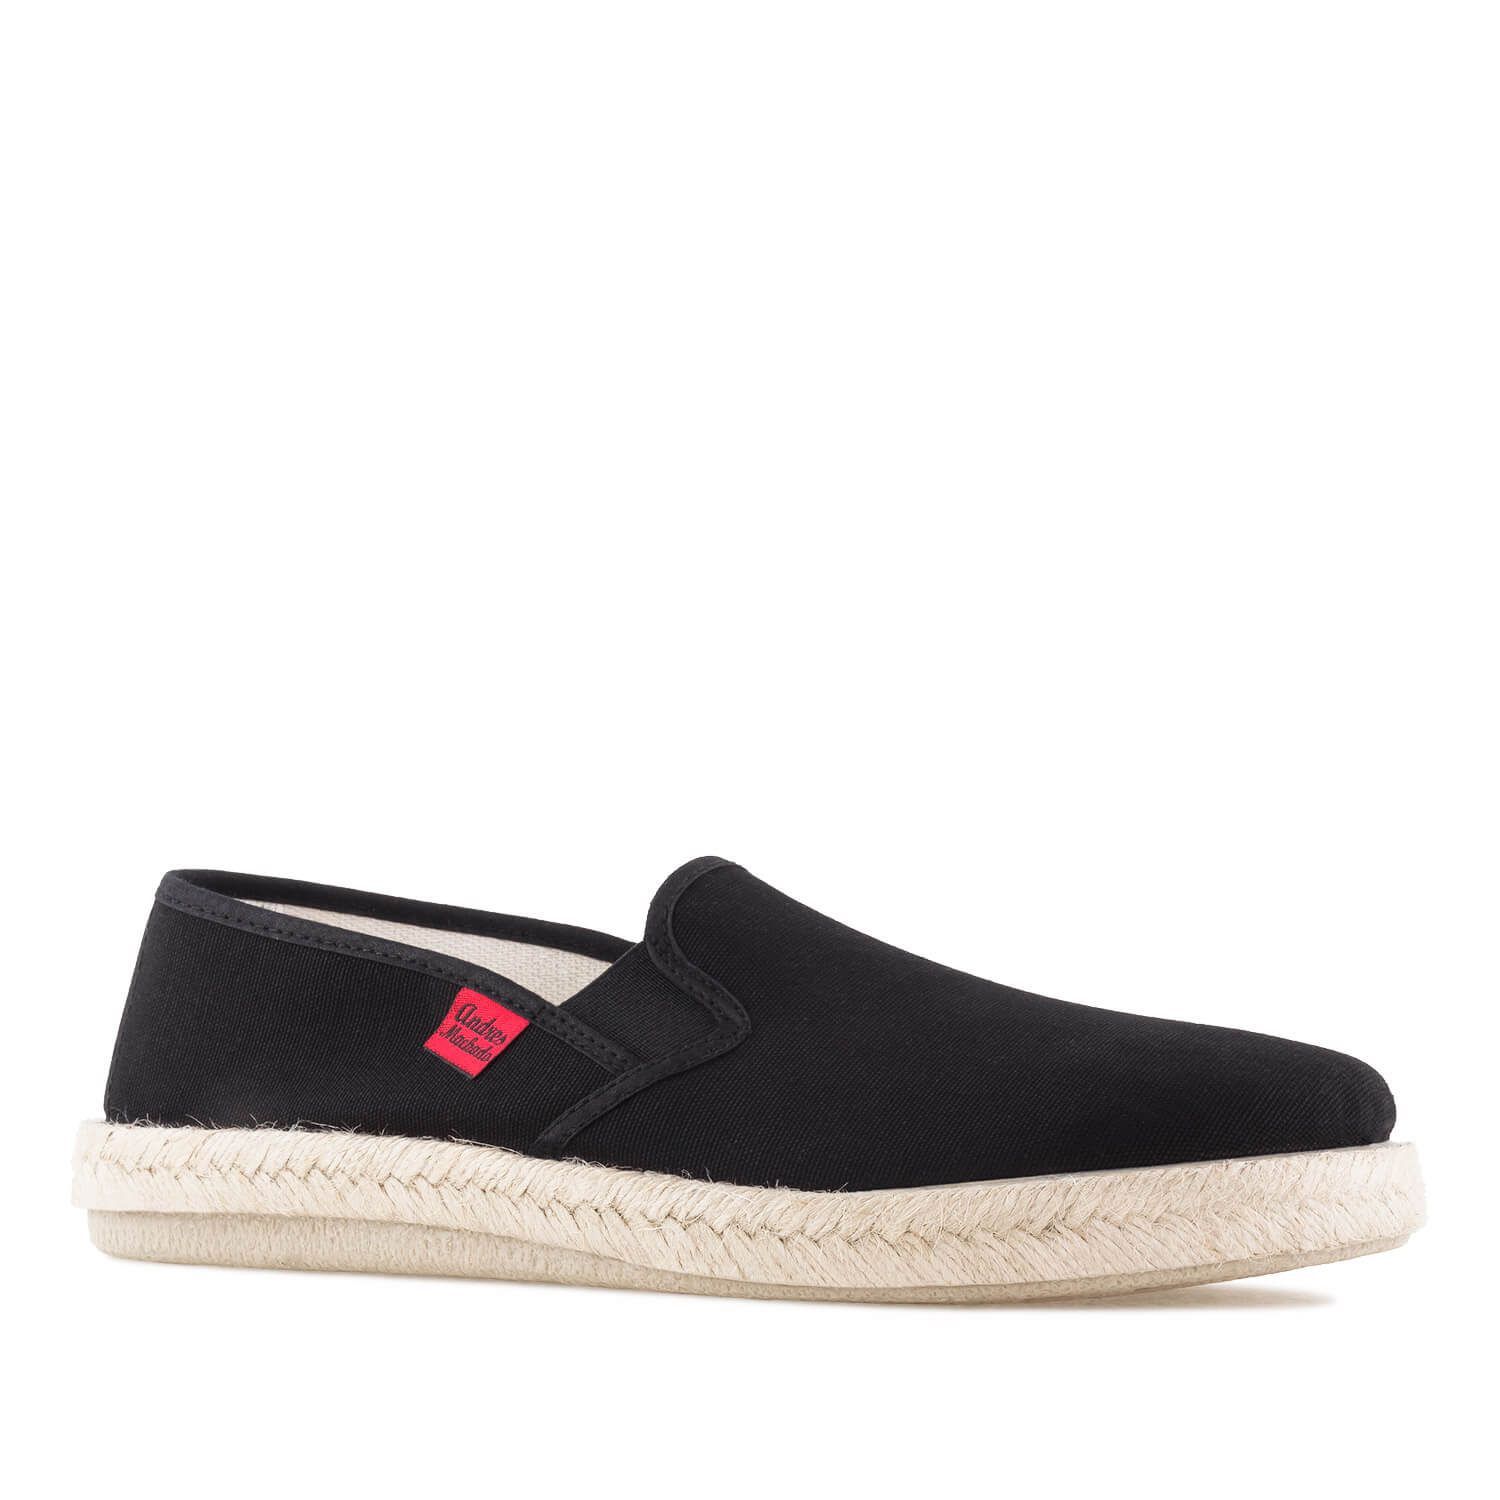 Mythical Black Canvas Slip-On Shoes with Rubber and Jute Sole 